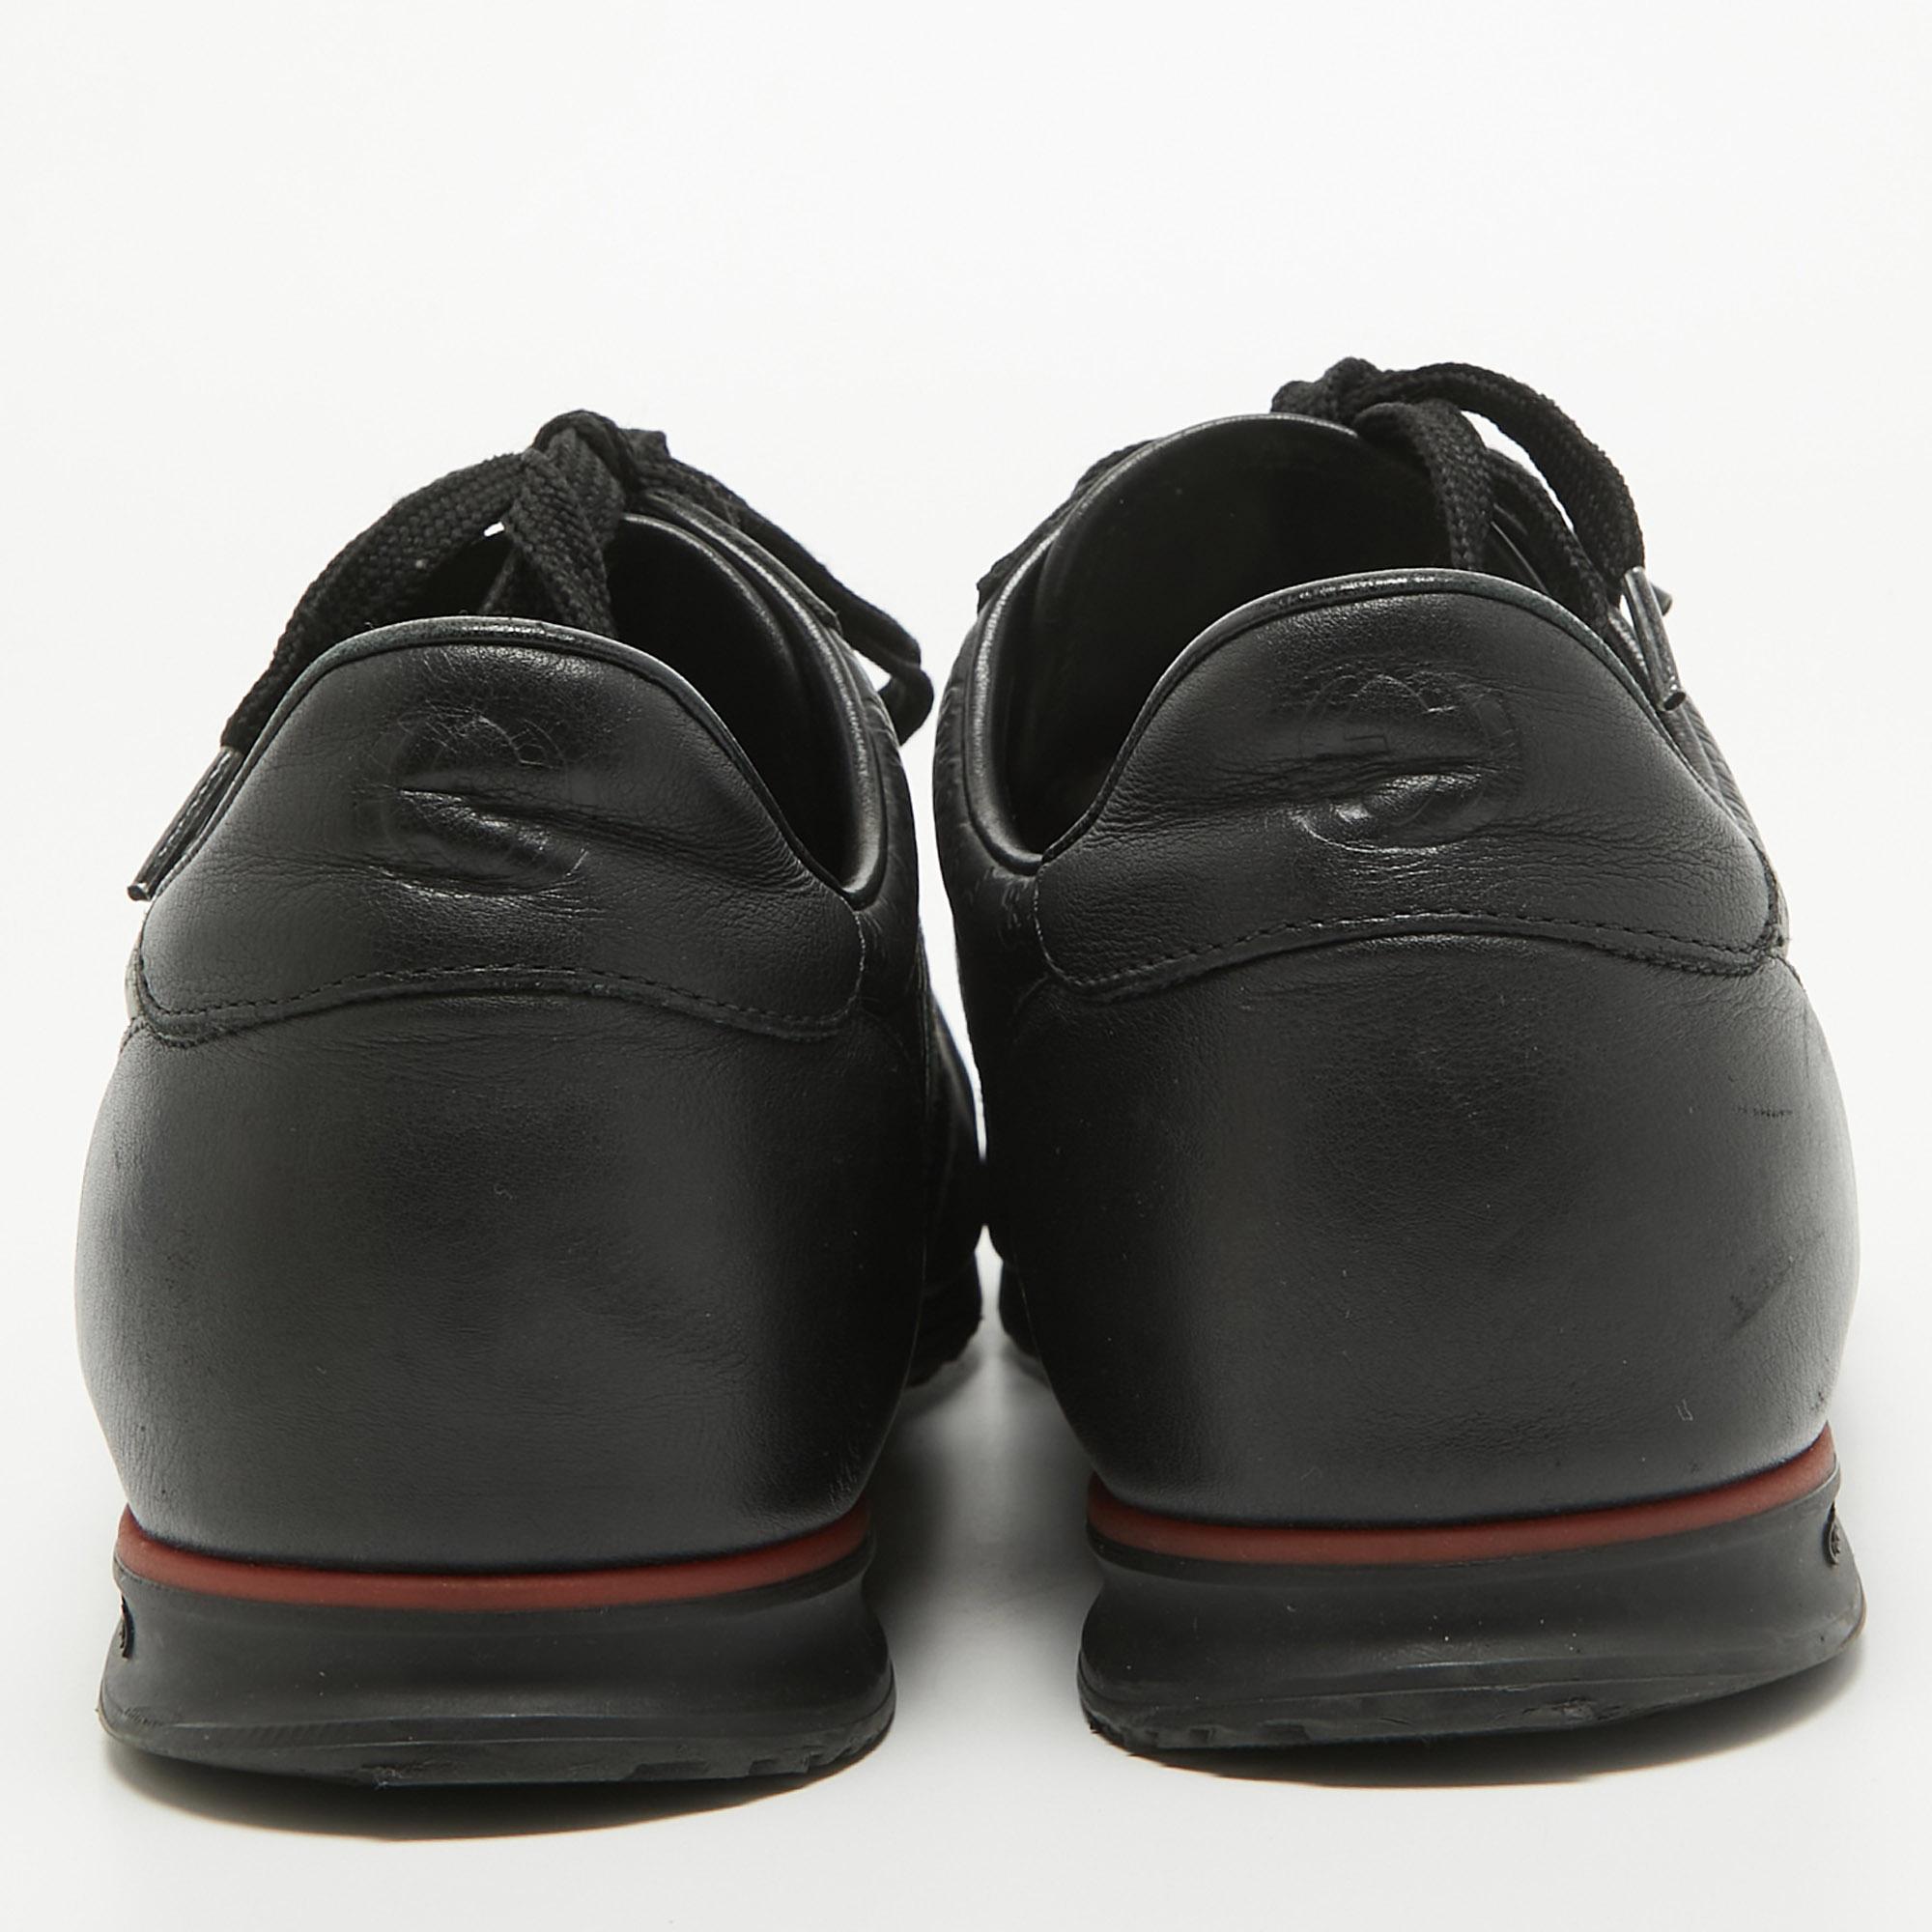 Gucci Black Guccissima Leather Web Ace Sneakers Size 45.5 For Sale 2